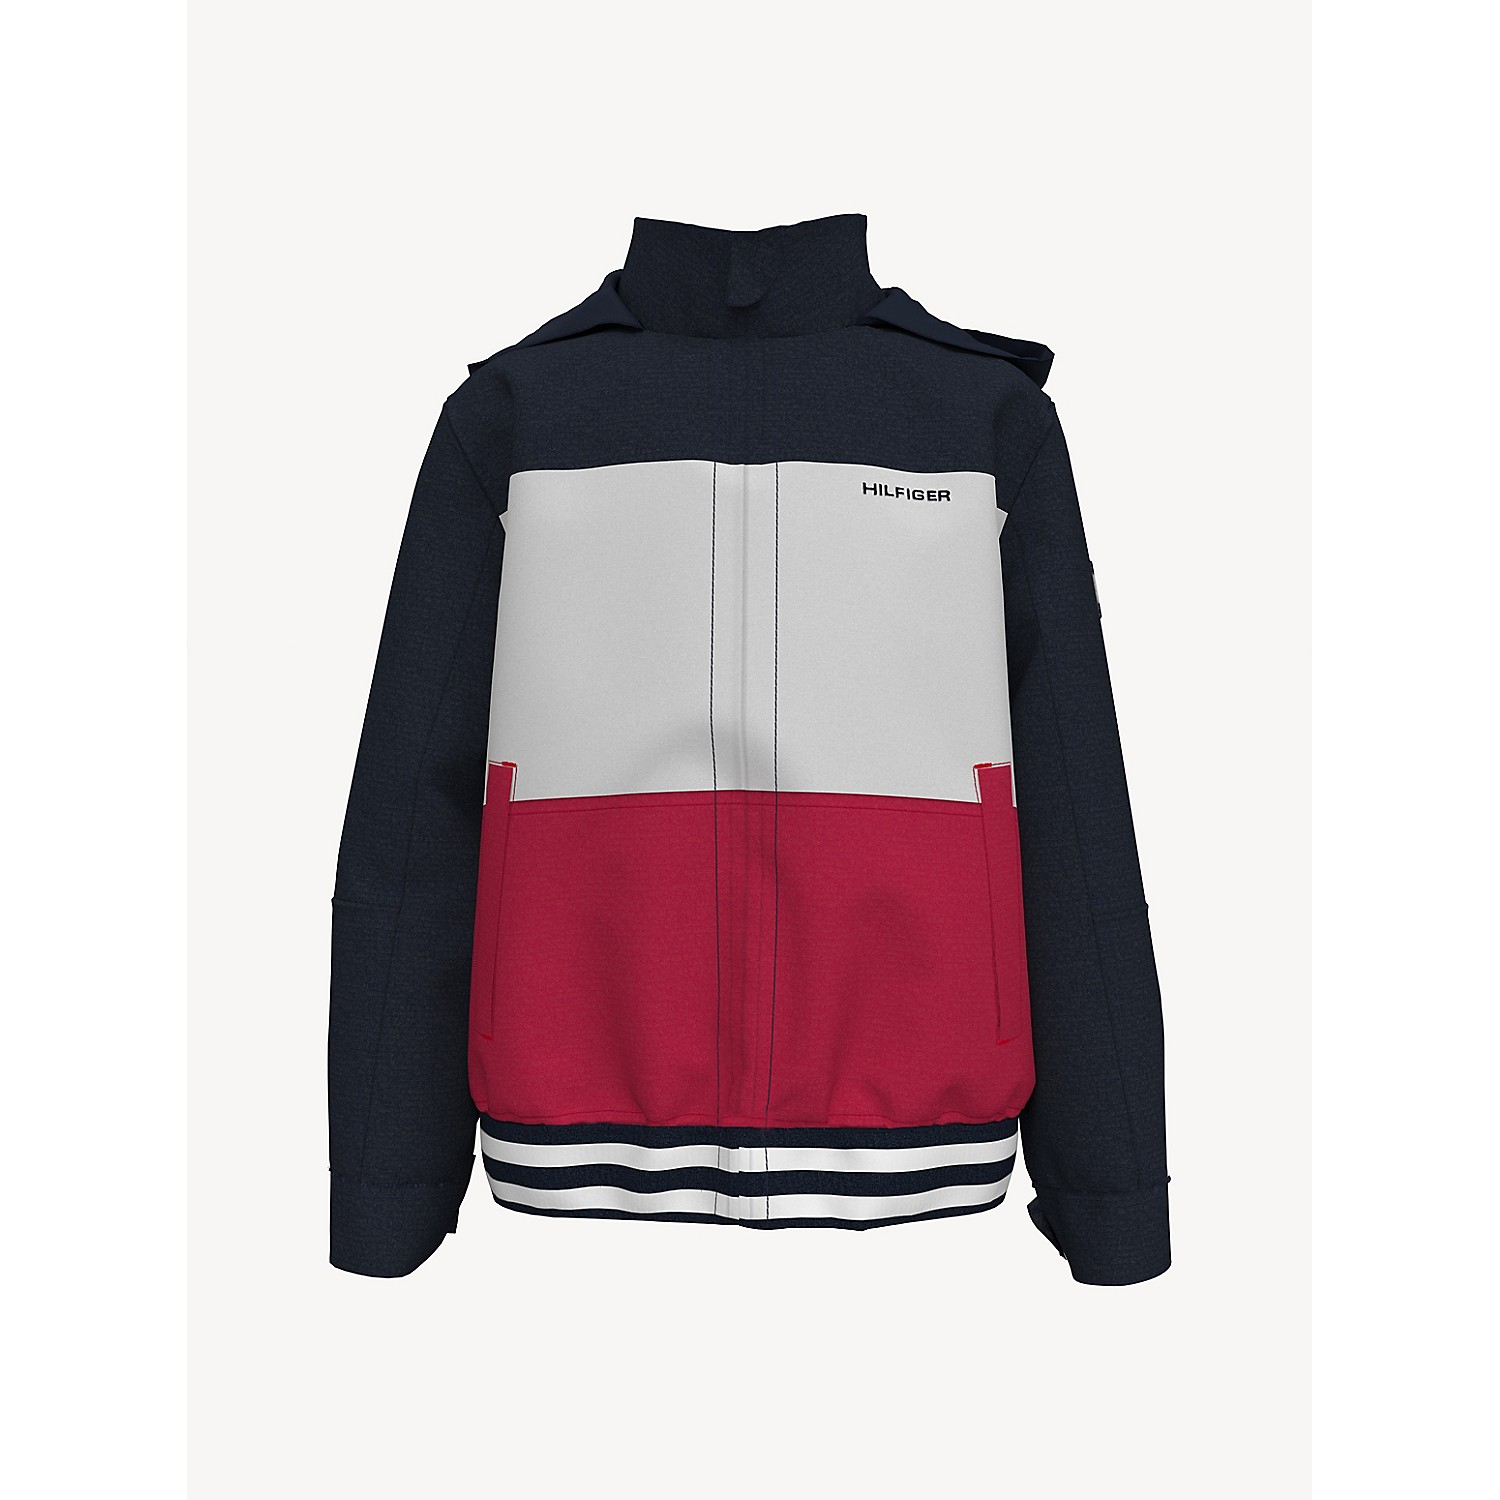 TOMMY HILFIGER Kids Colorblock Yachting Jacket